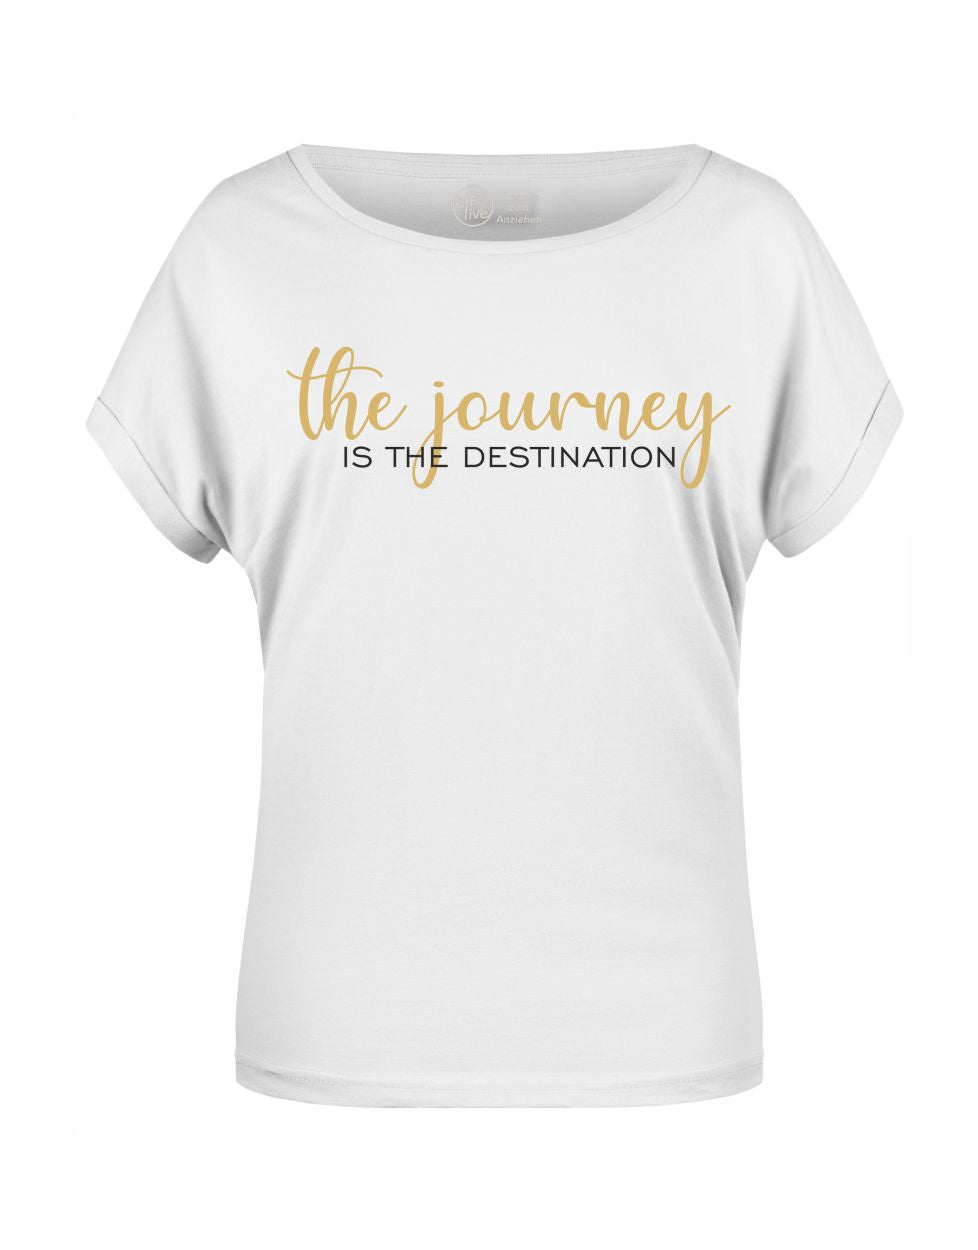 the journey is the destination Frauen T-Shirt travel vanlife Damen camping Shirt weiss white tank top malle party Beach club hemd Bluse Women Girls off-to-live